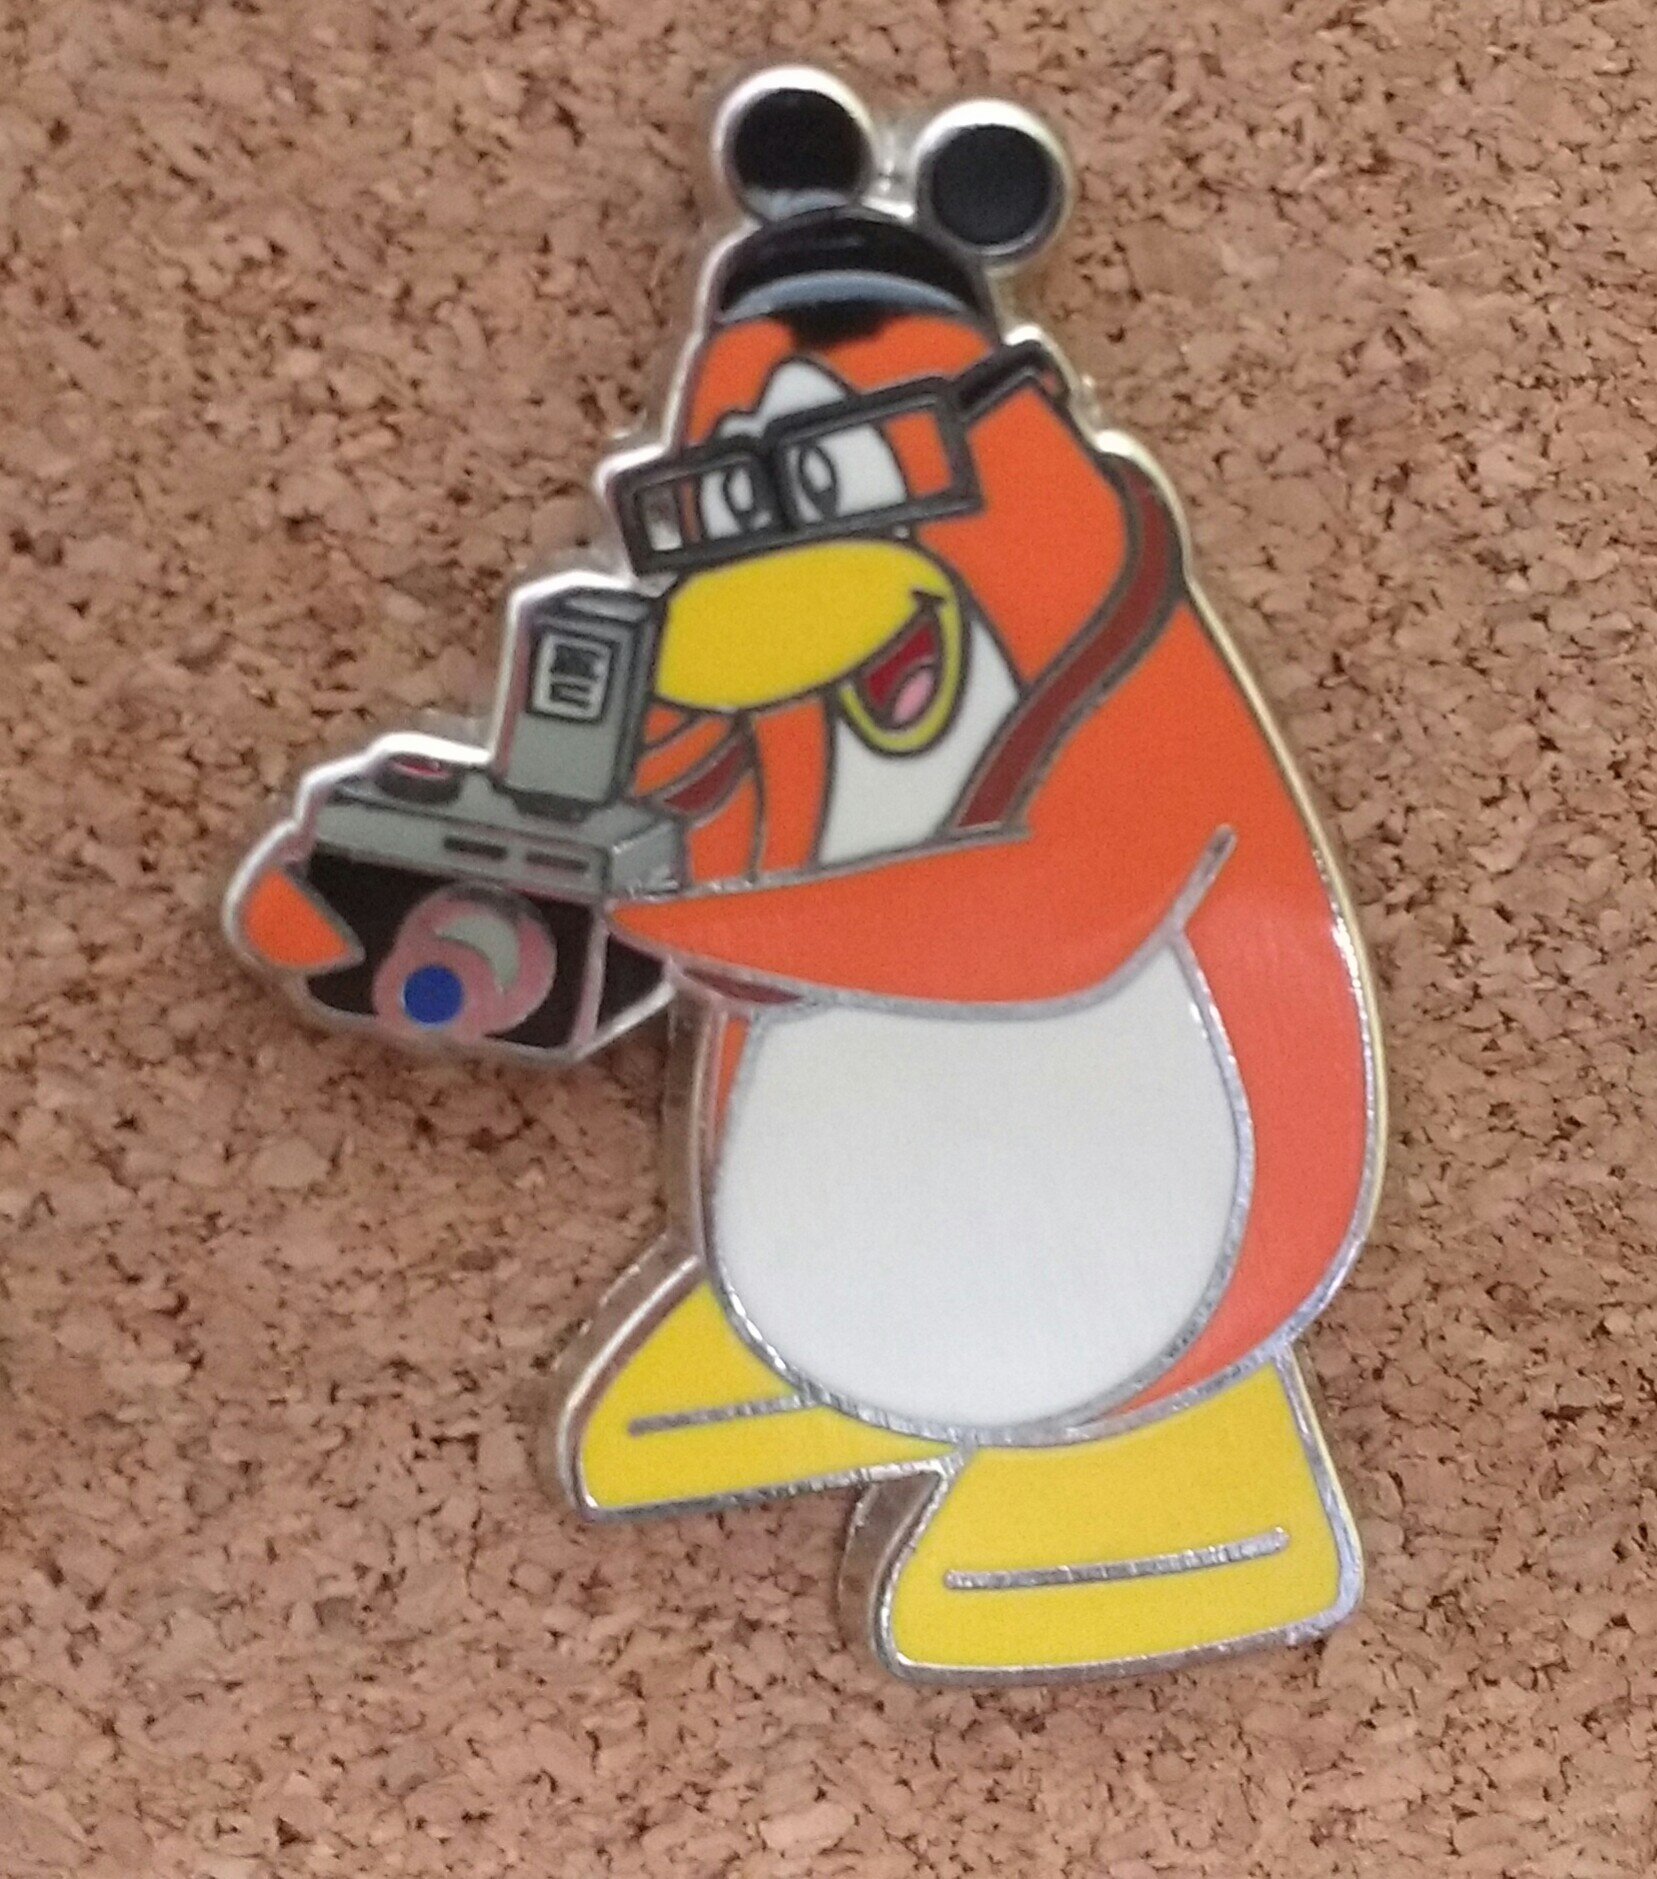 This Disney pin is basically my spirit animal. A penguin at Disney World taking pictures.